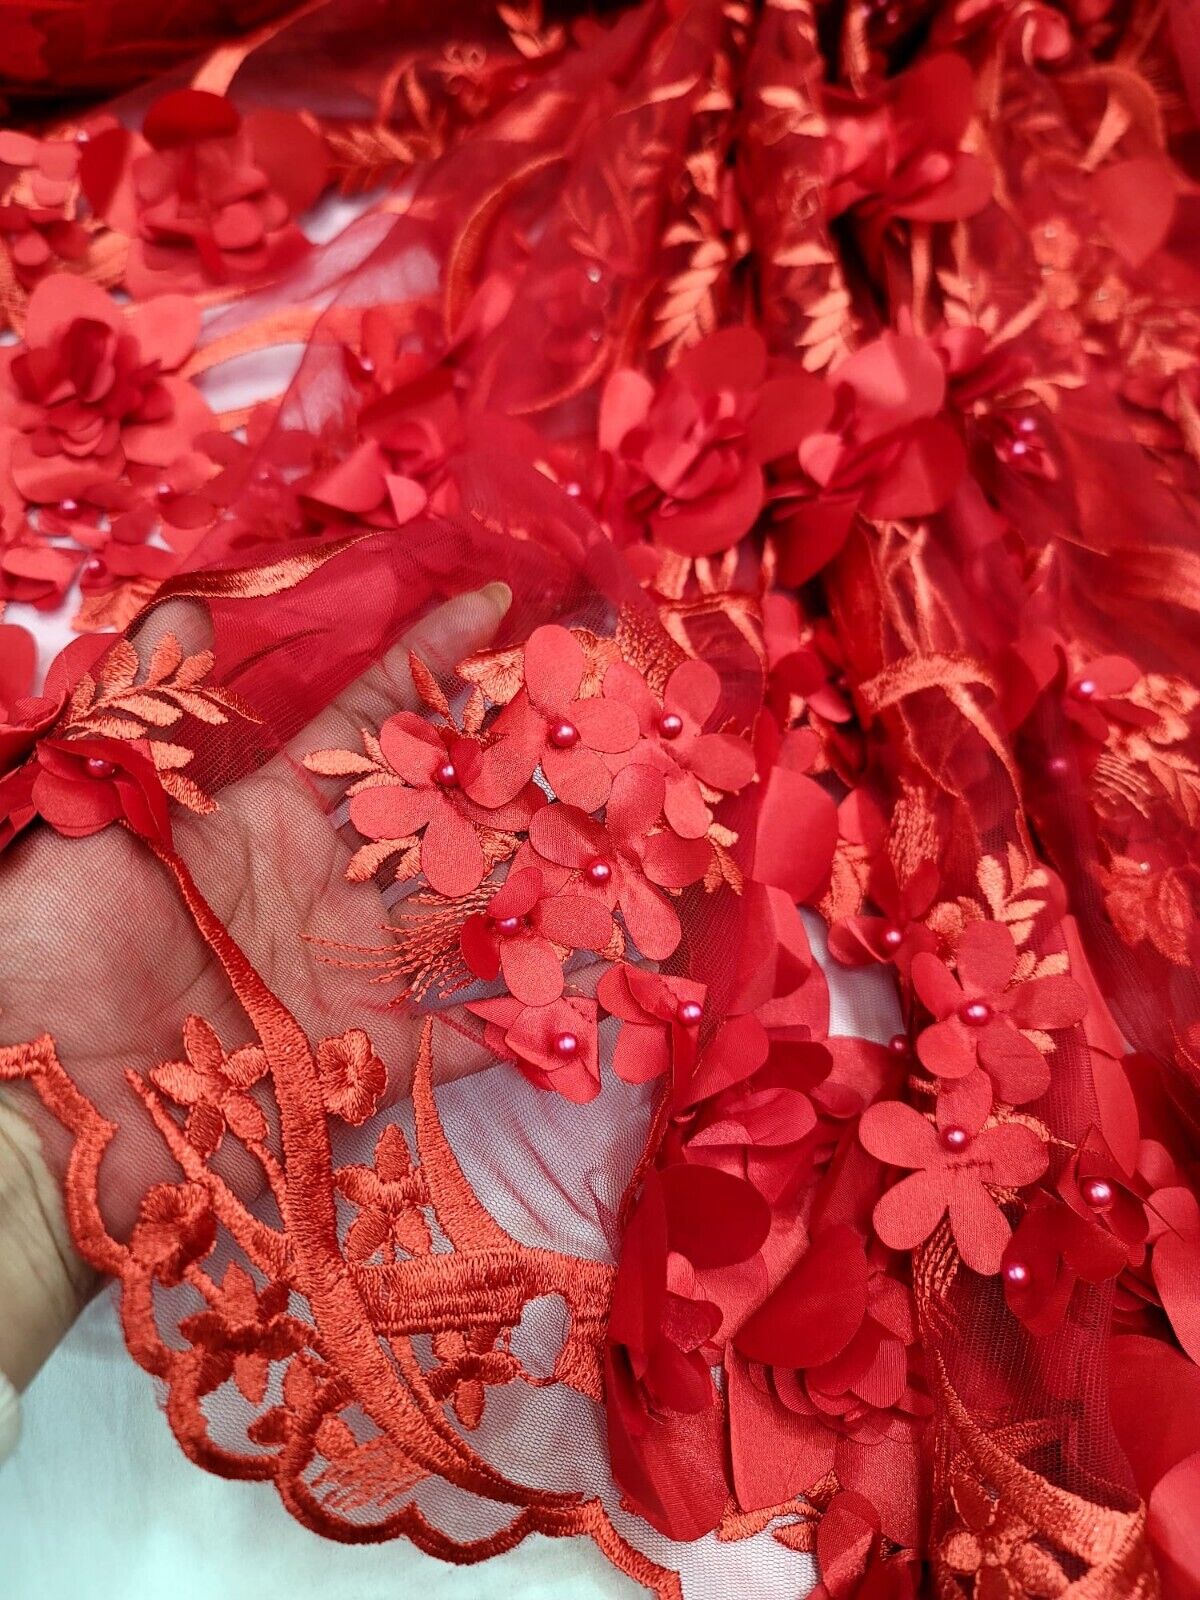 Red 3D Floral Embroidered Pearls Mesh Lace Fabric By The Yard